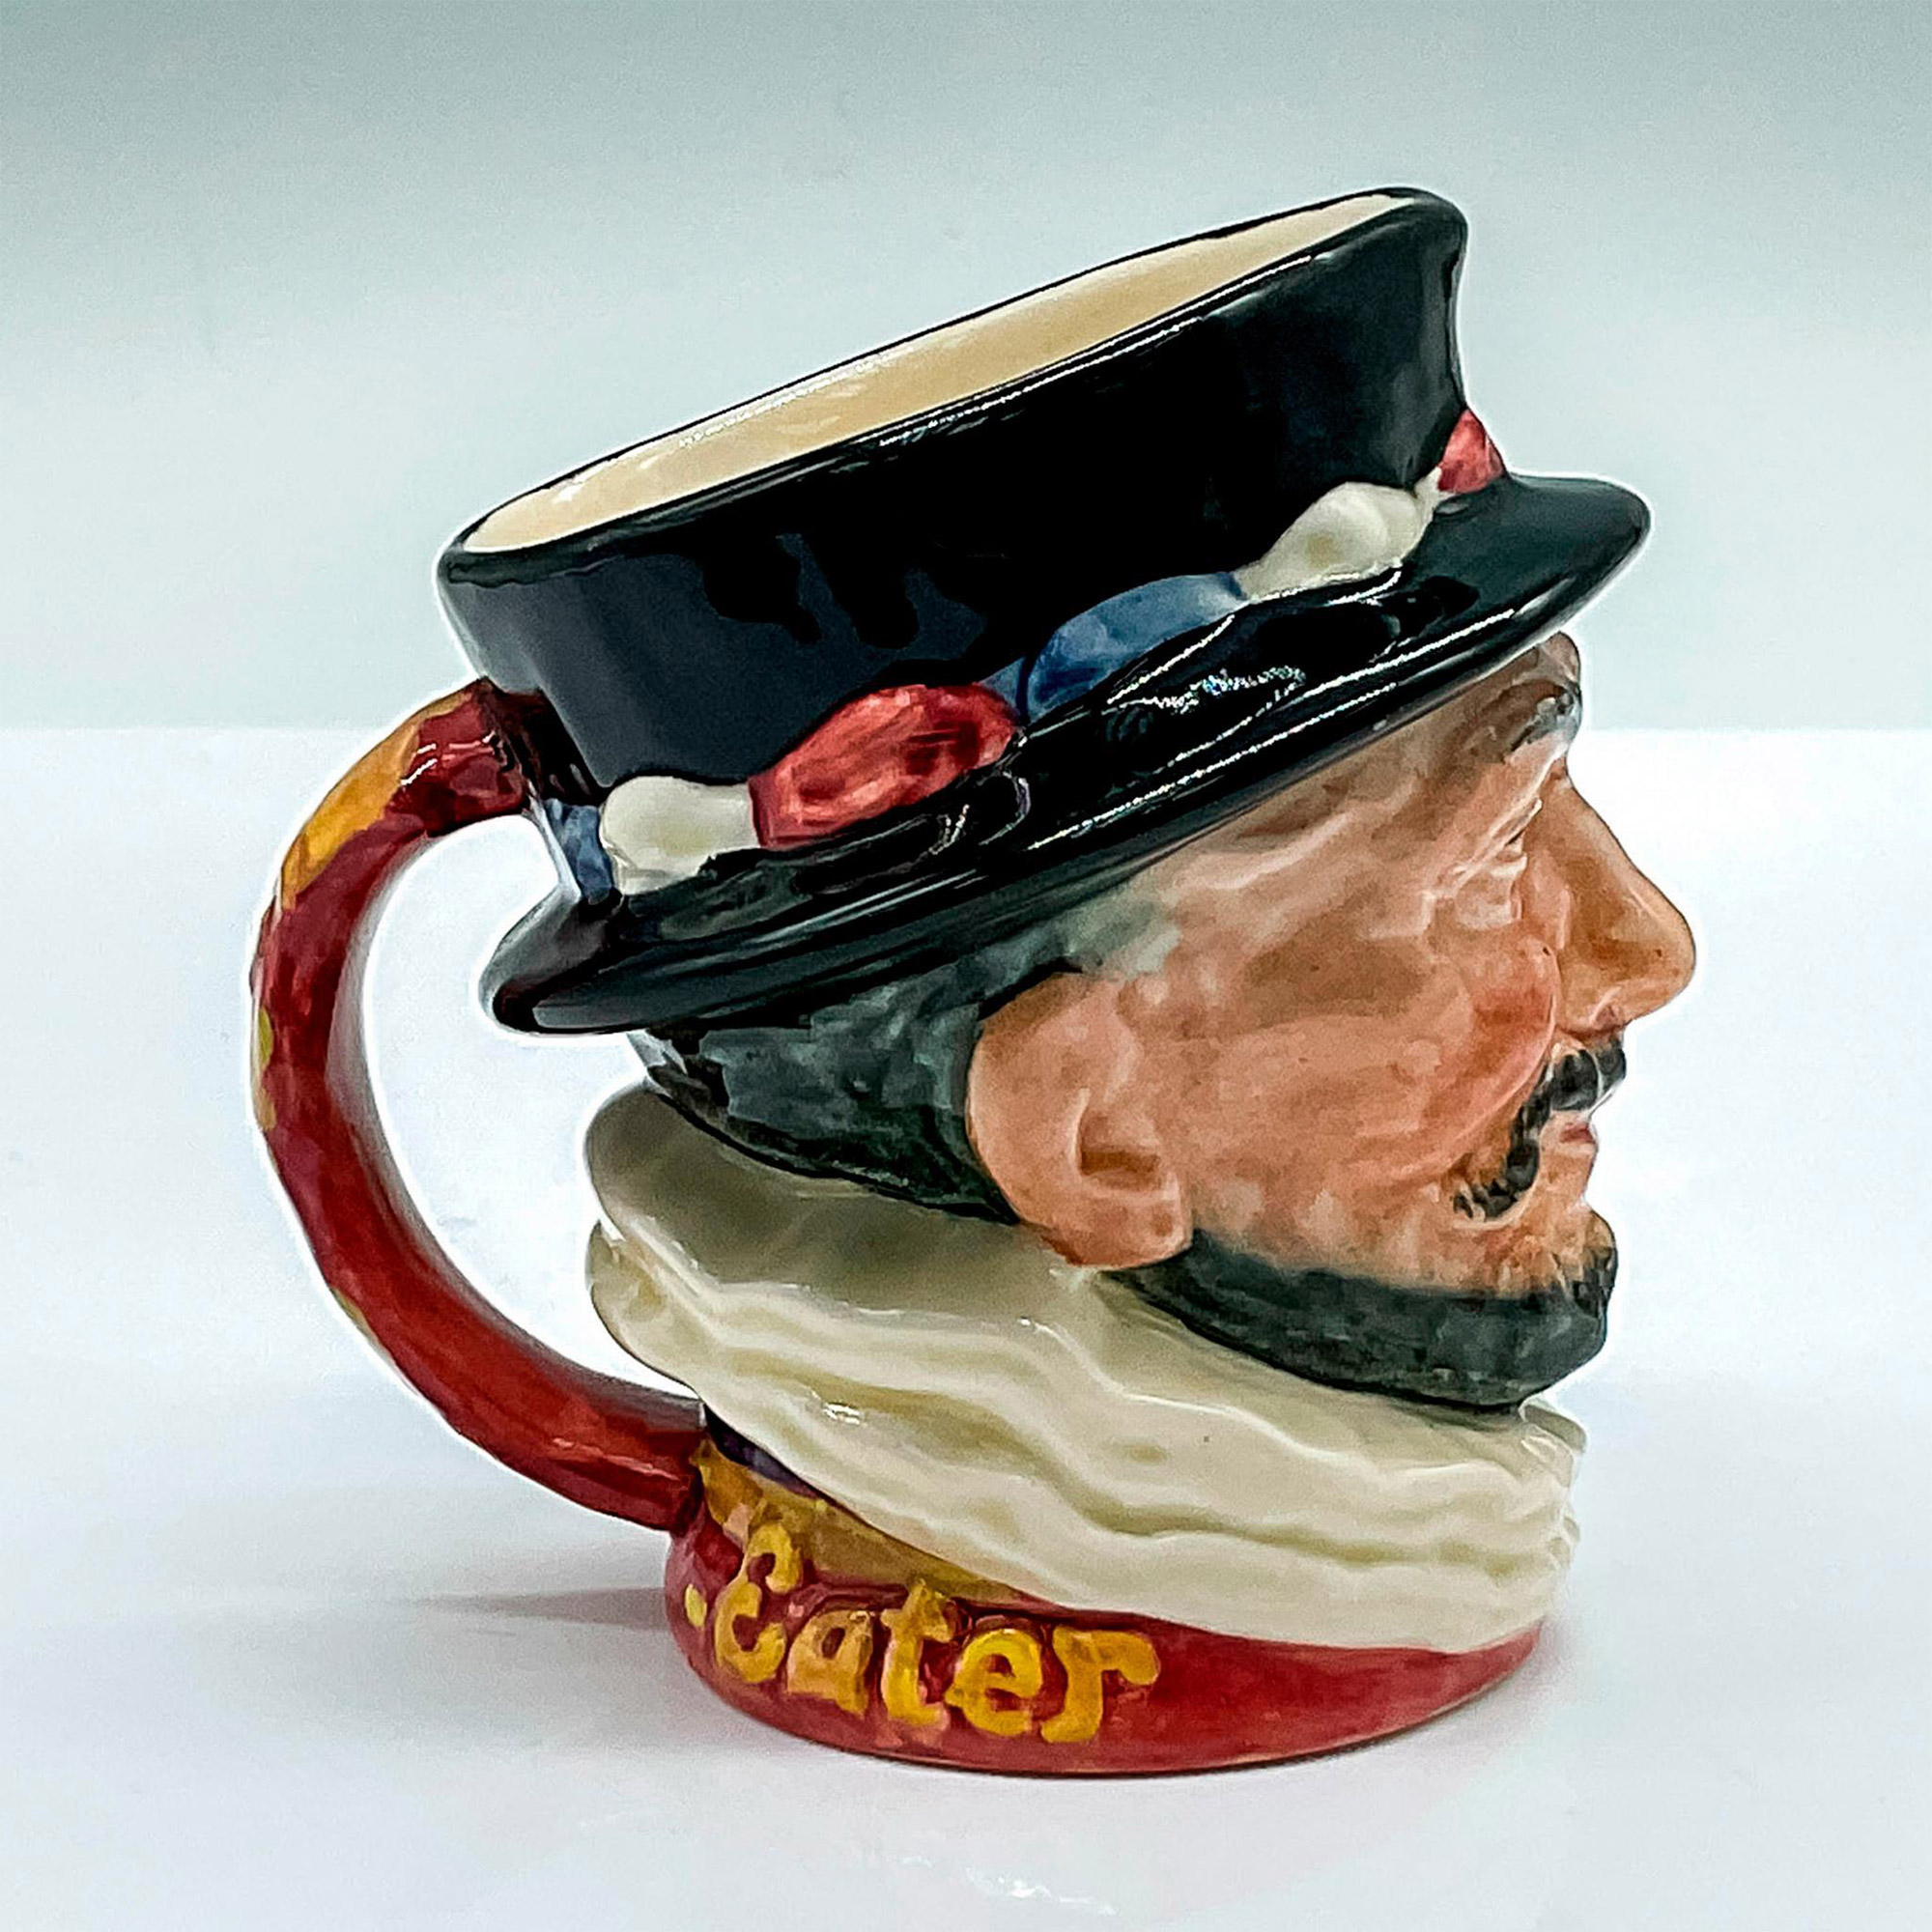 Beefeater GR D6233 - Small - Royal Doulton Character Jug - Image 3 of 5